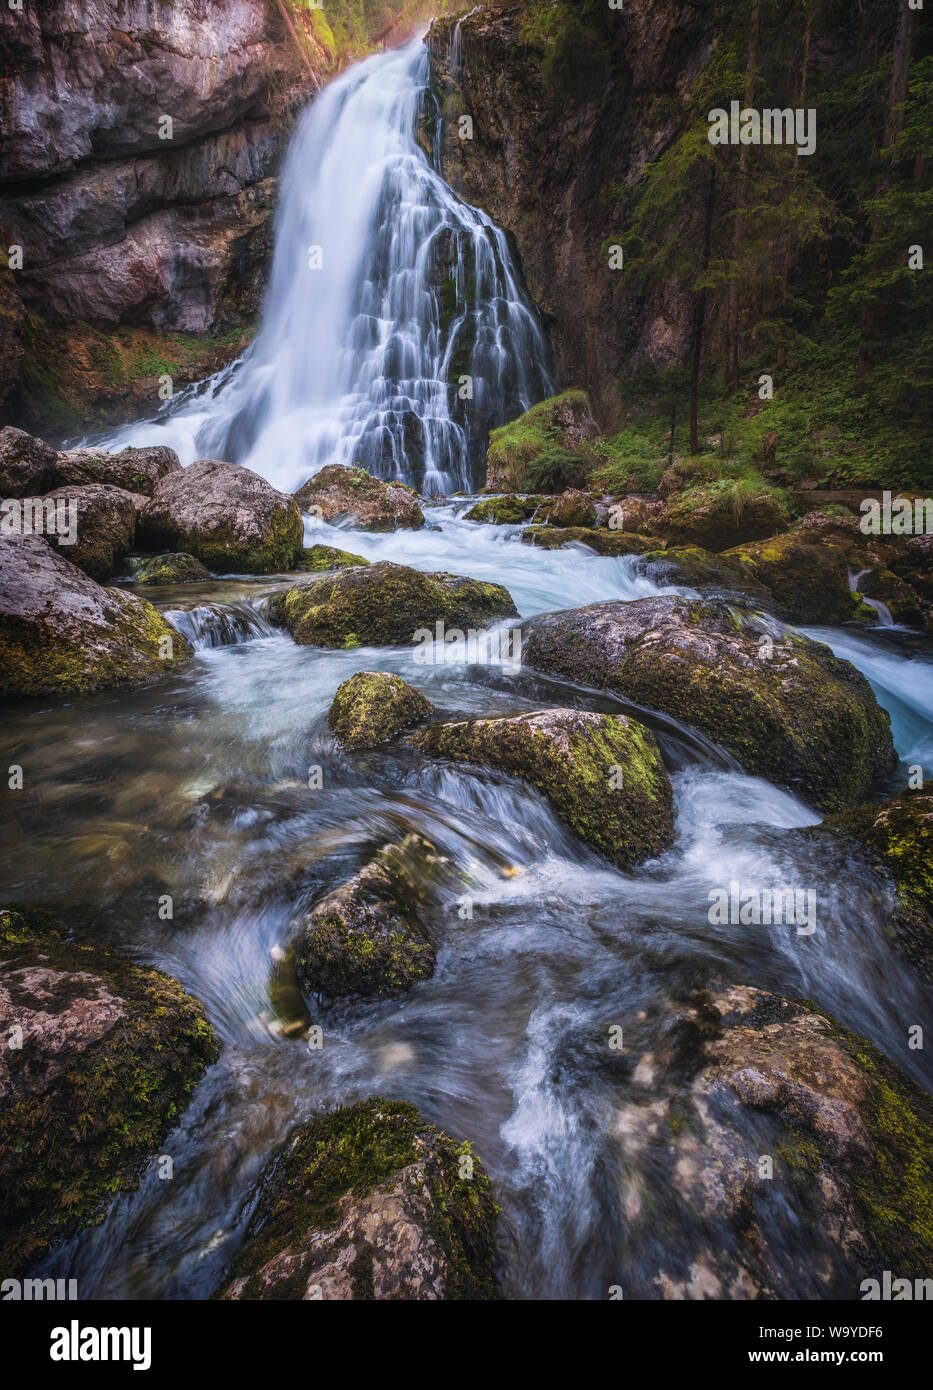 Scenic waterfall landscape with green moos stones and flowing river at beautiful summer day in Gollinger, Austria. Stock Photo